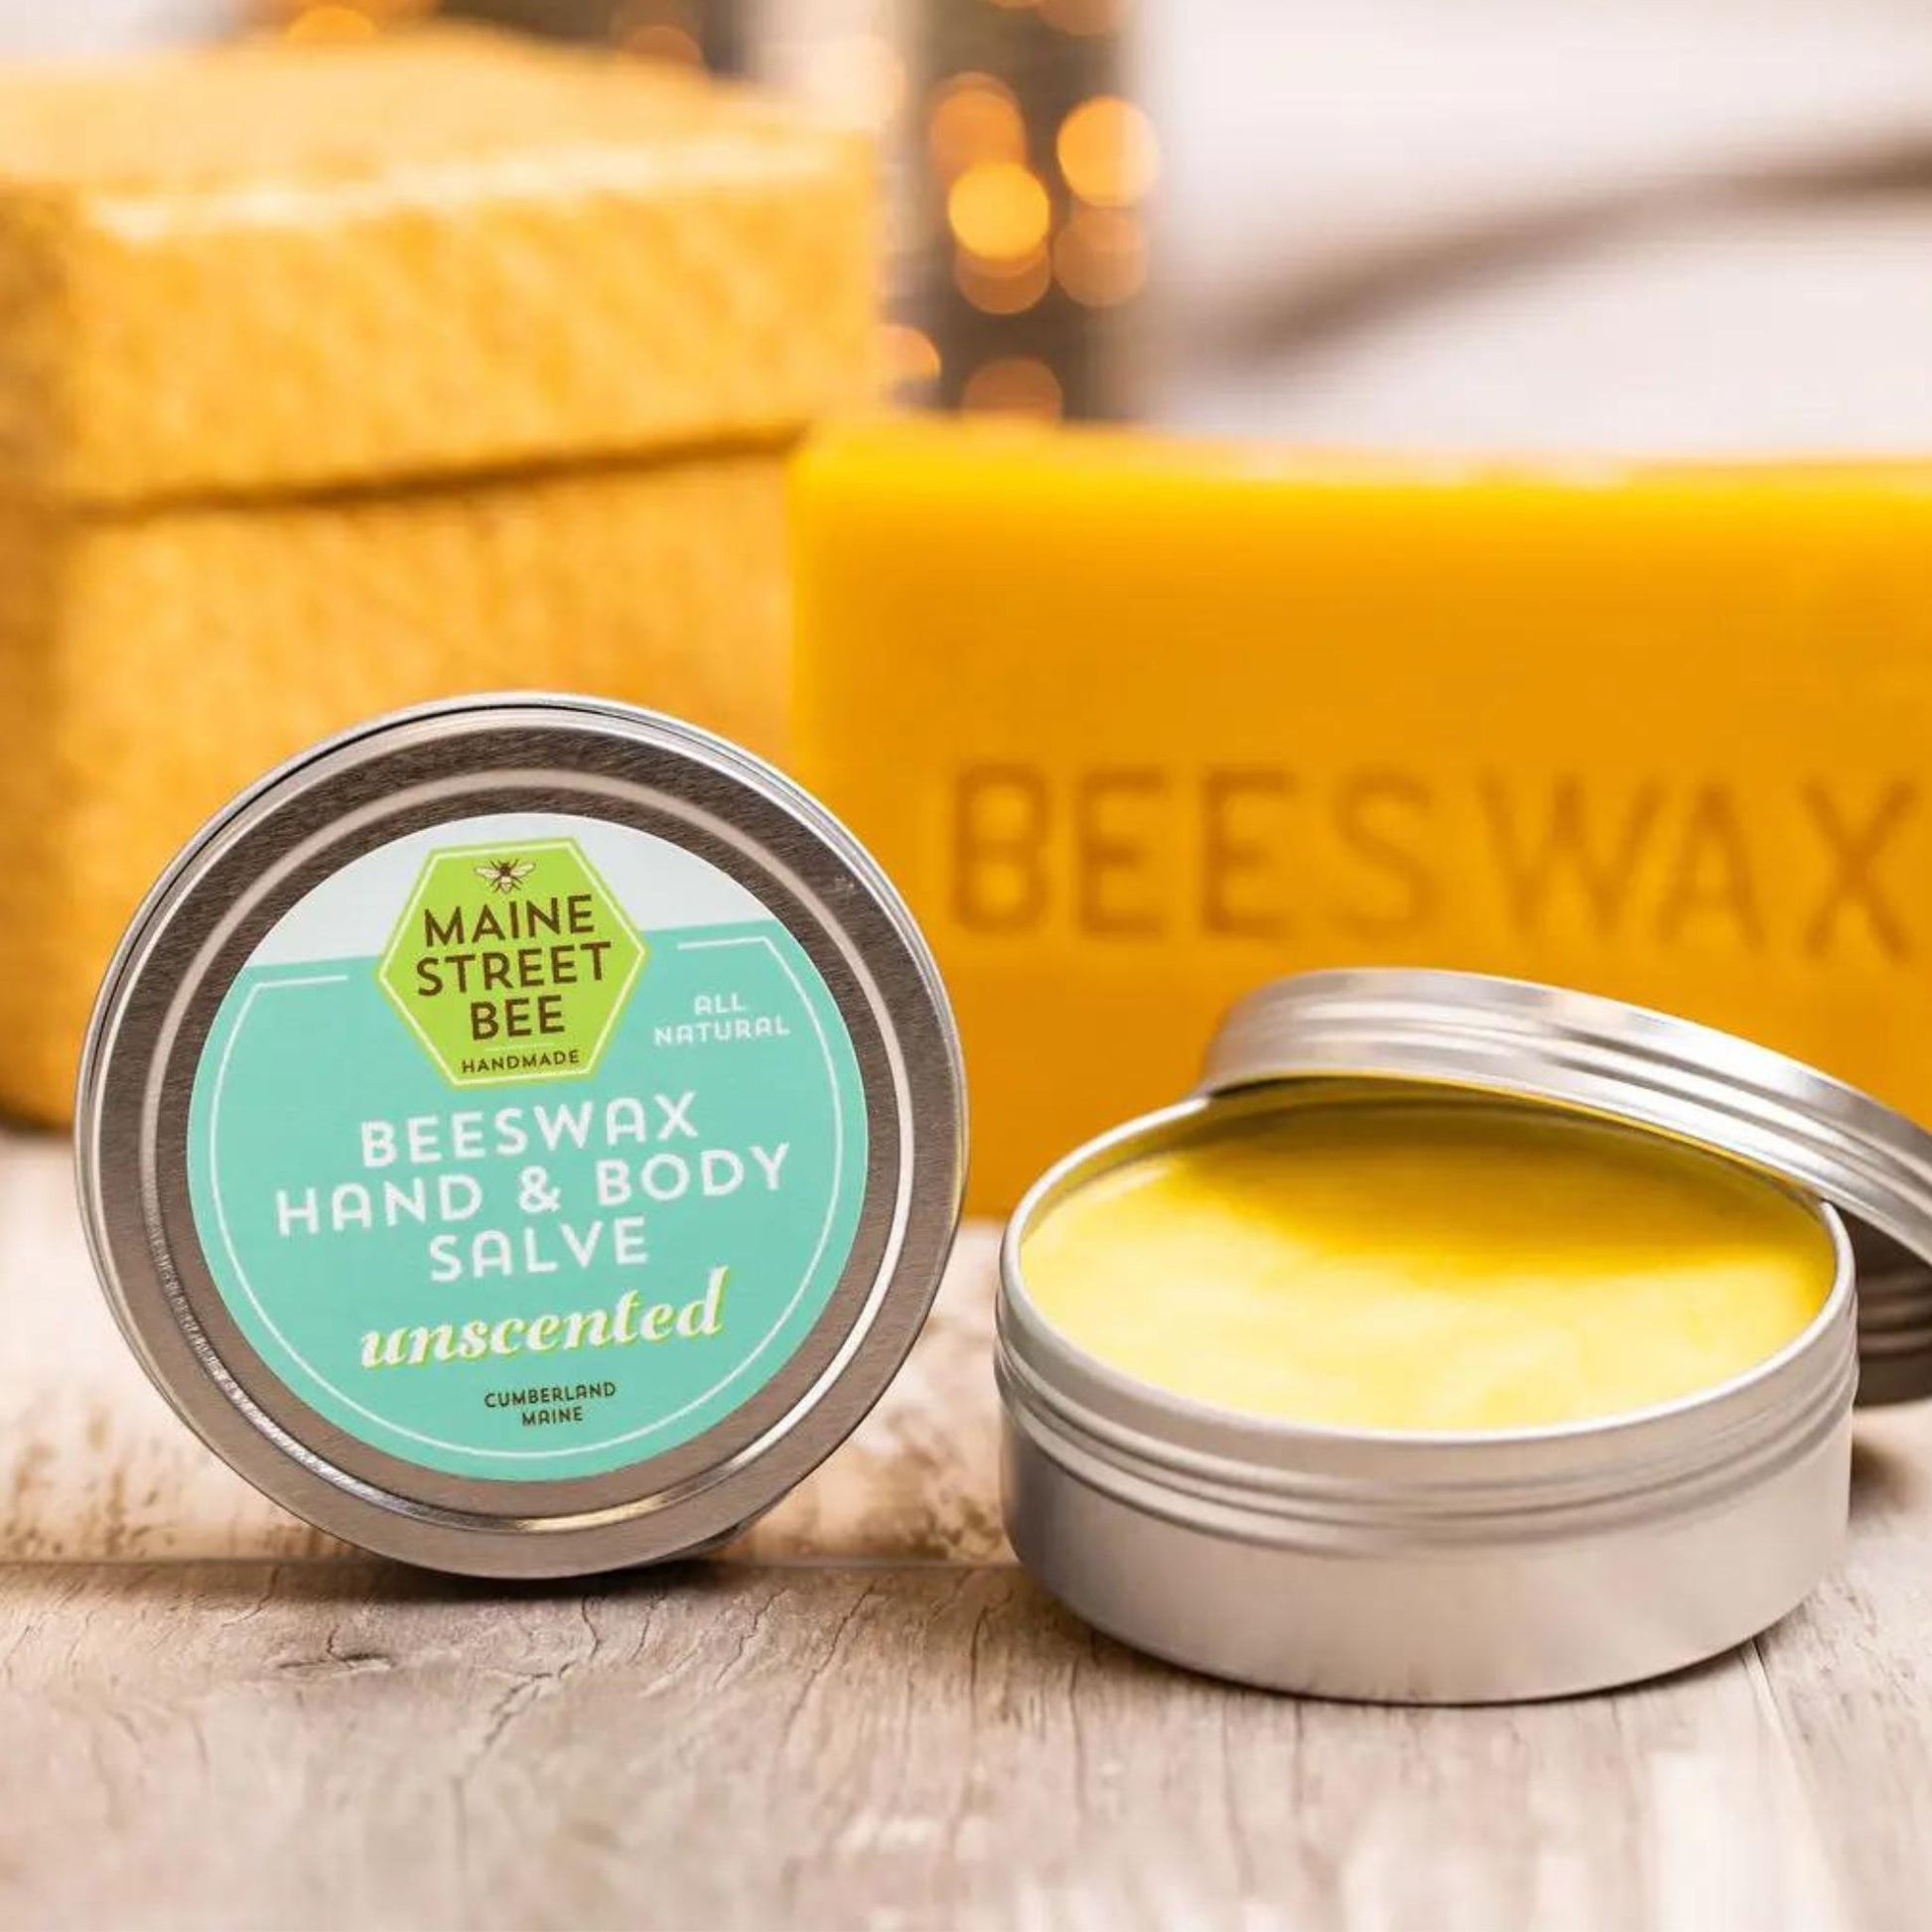 beeswax hand & body salve with beeswax